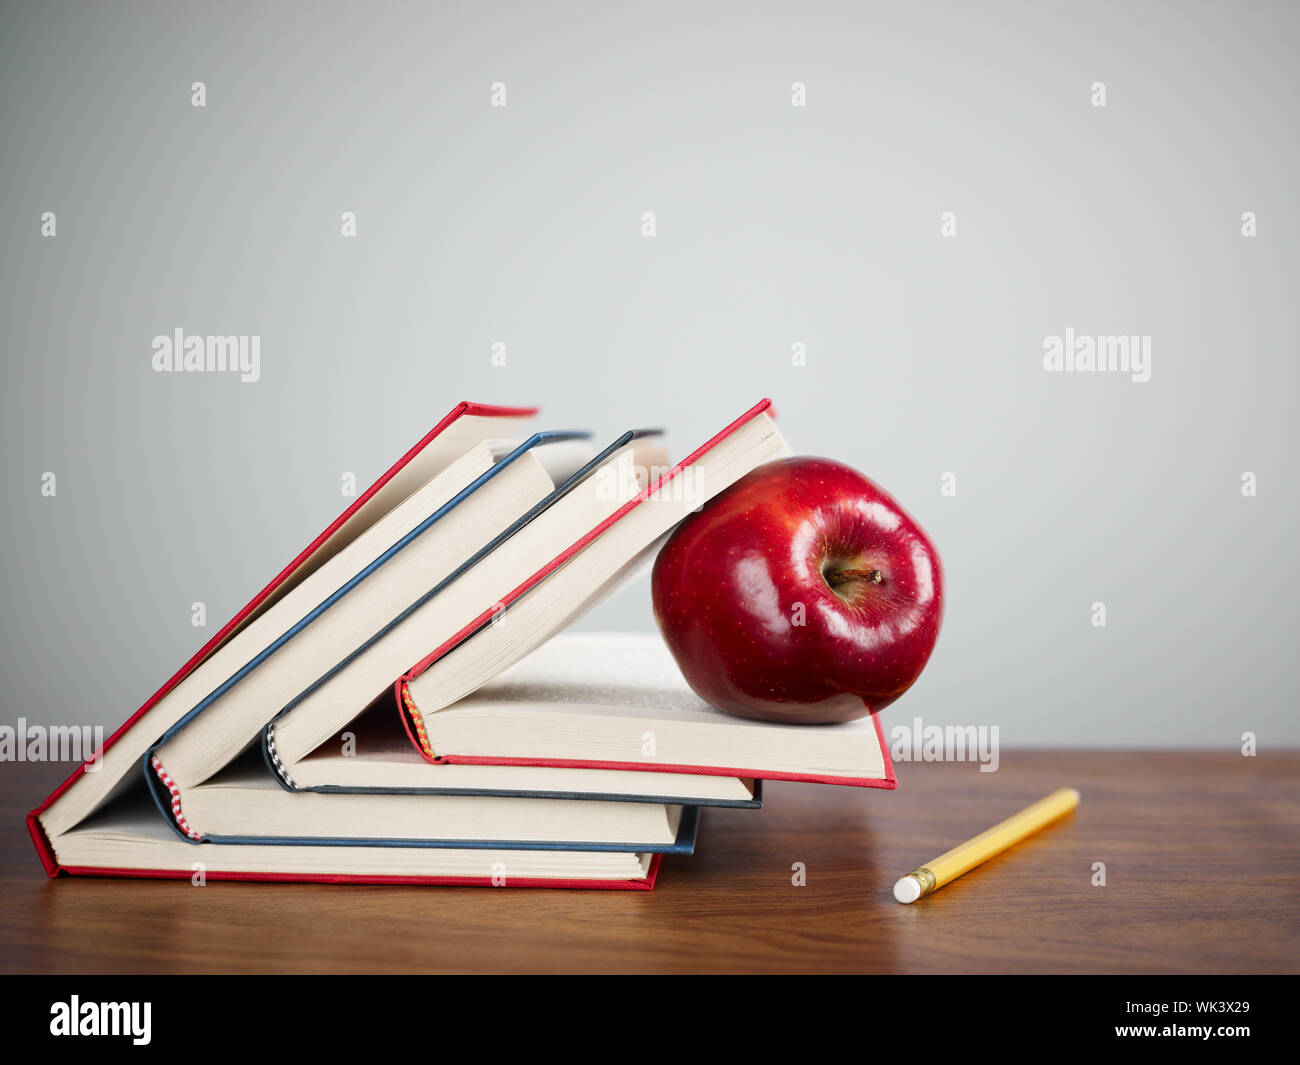 Pile Of Books And Red Apple On Desk Copy Space Stock Photo